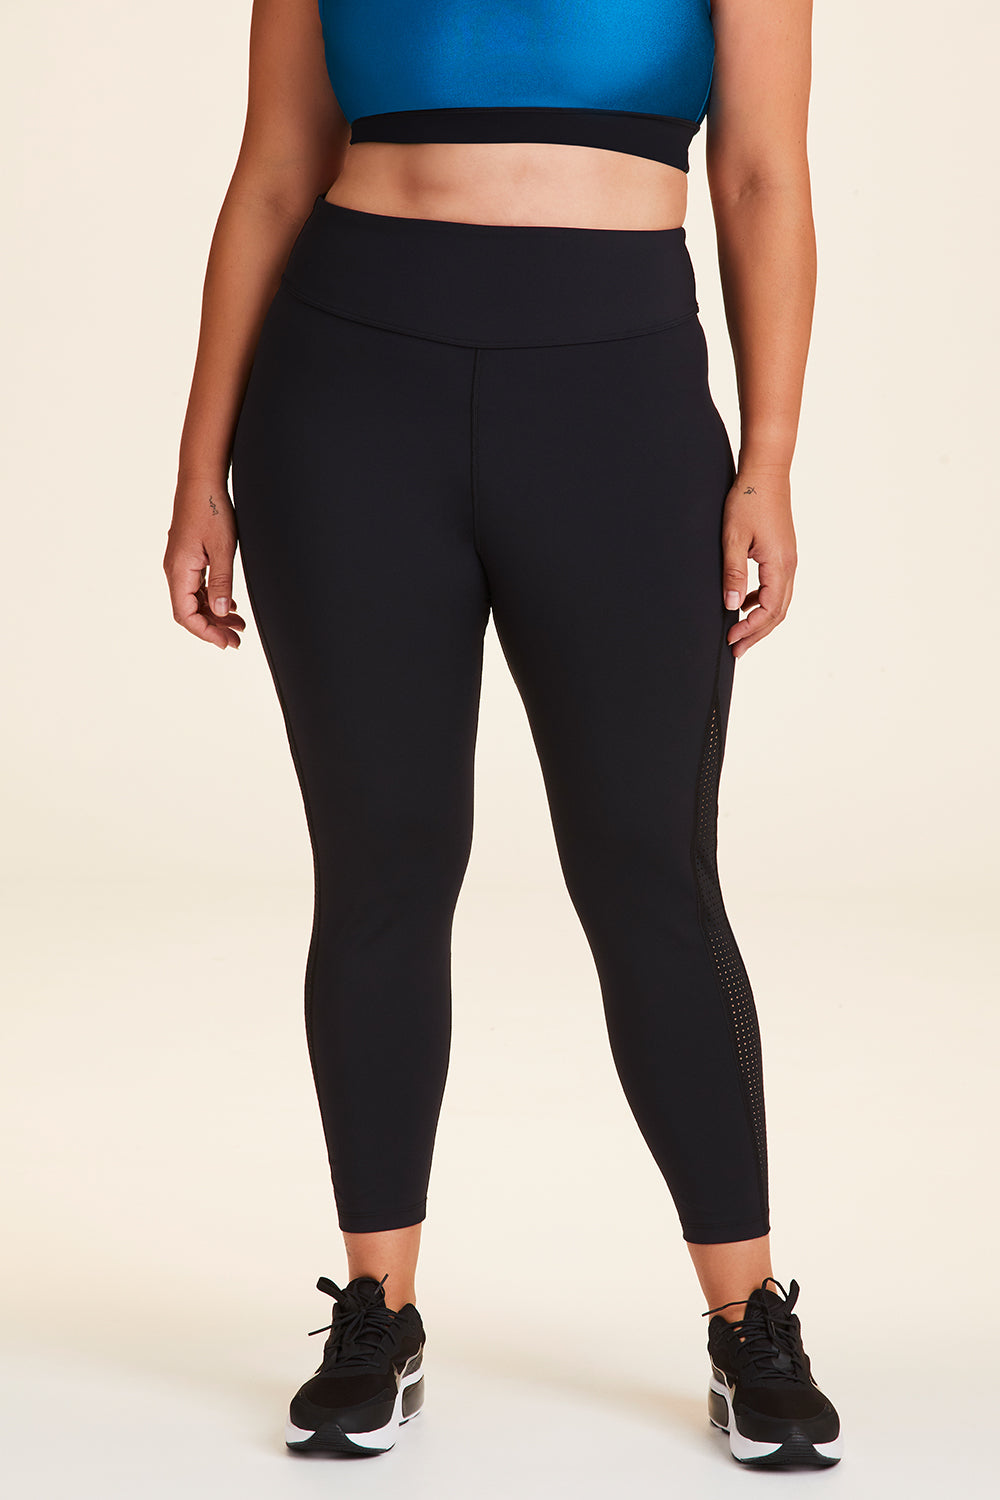 Front view of Alala Women's Luxury Athleisure black and teal 7/8 tight with minimal mesh detail in plus size